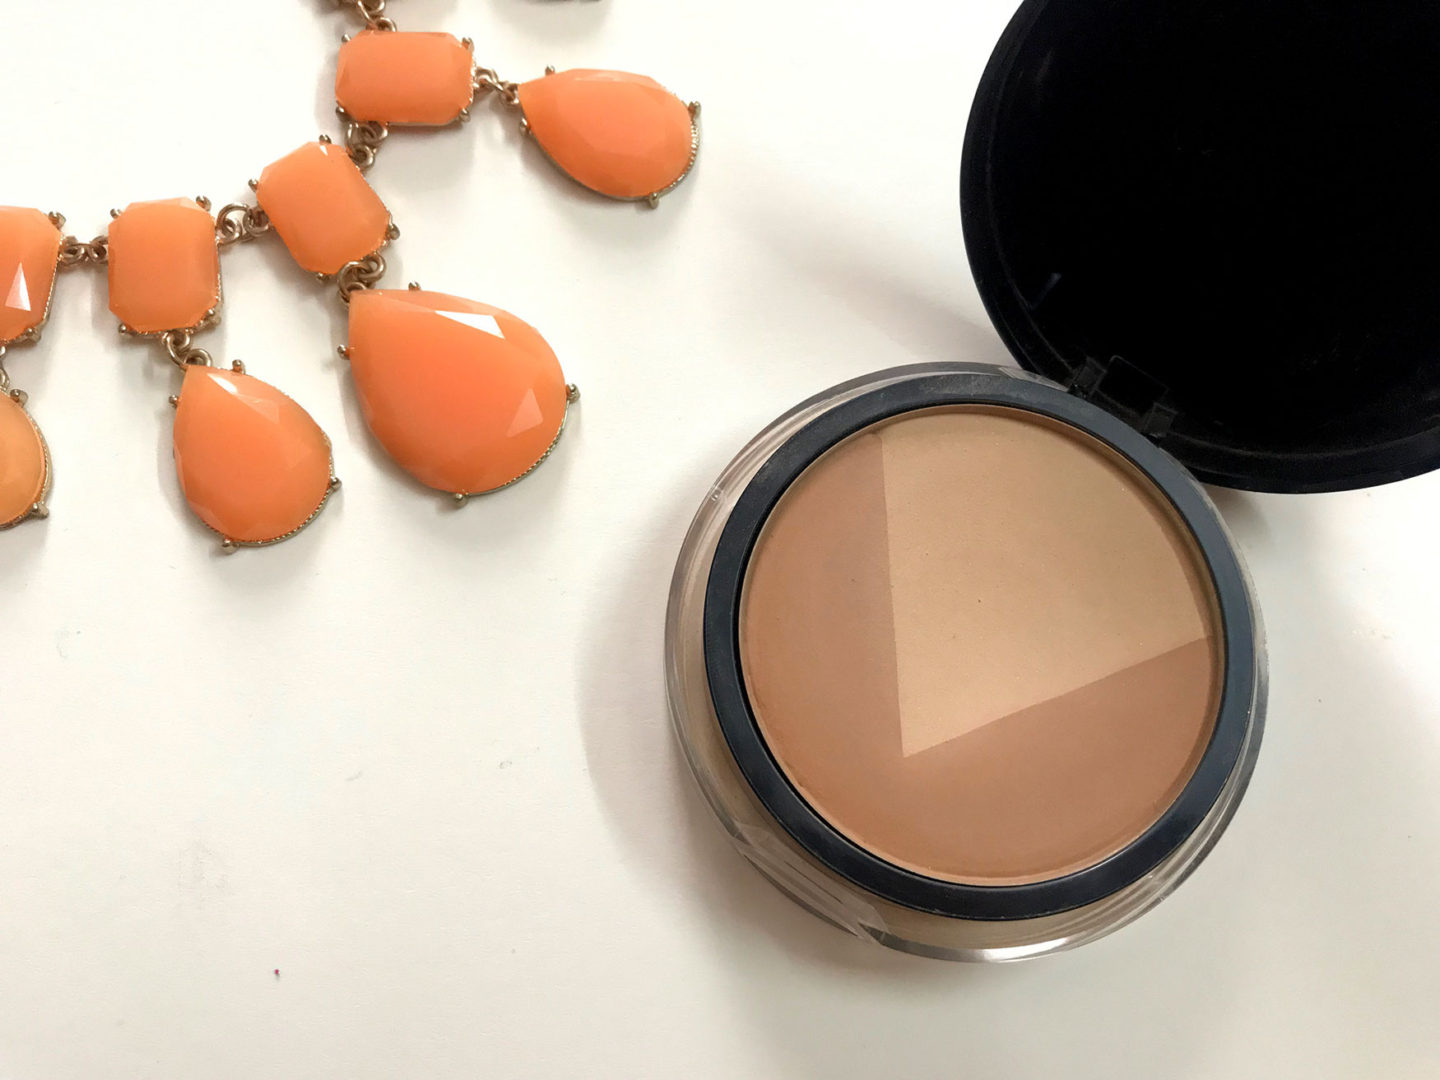 Maybelline-V-Face-Duo-Powder-Review-swatch